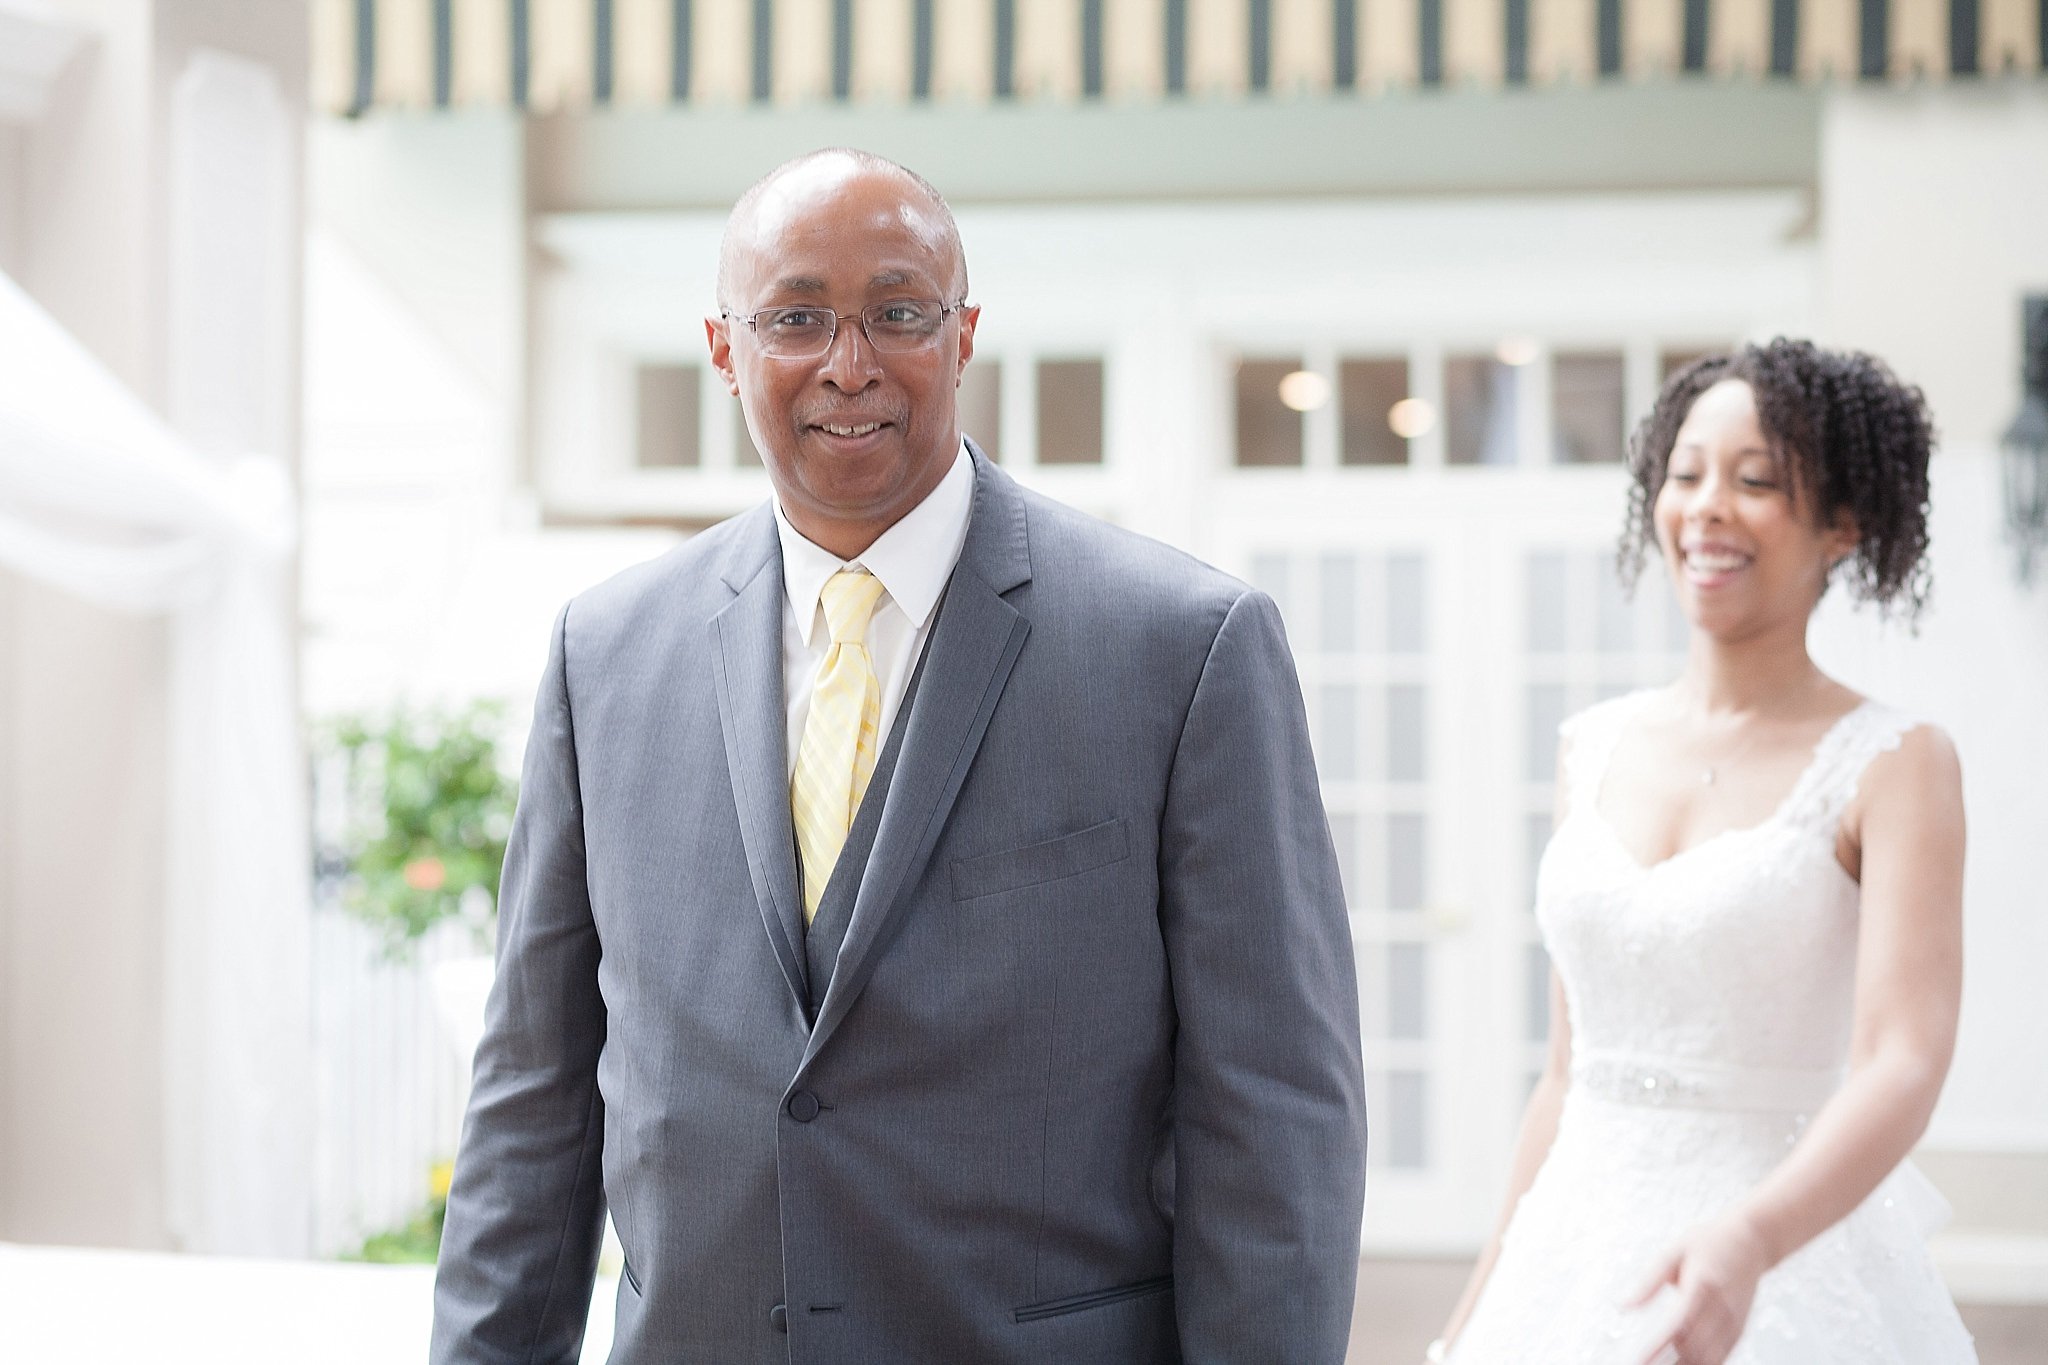 The Nelson Wedding - The Campbell House in Lexington, KY